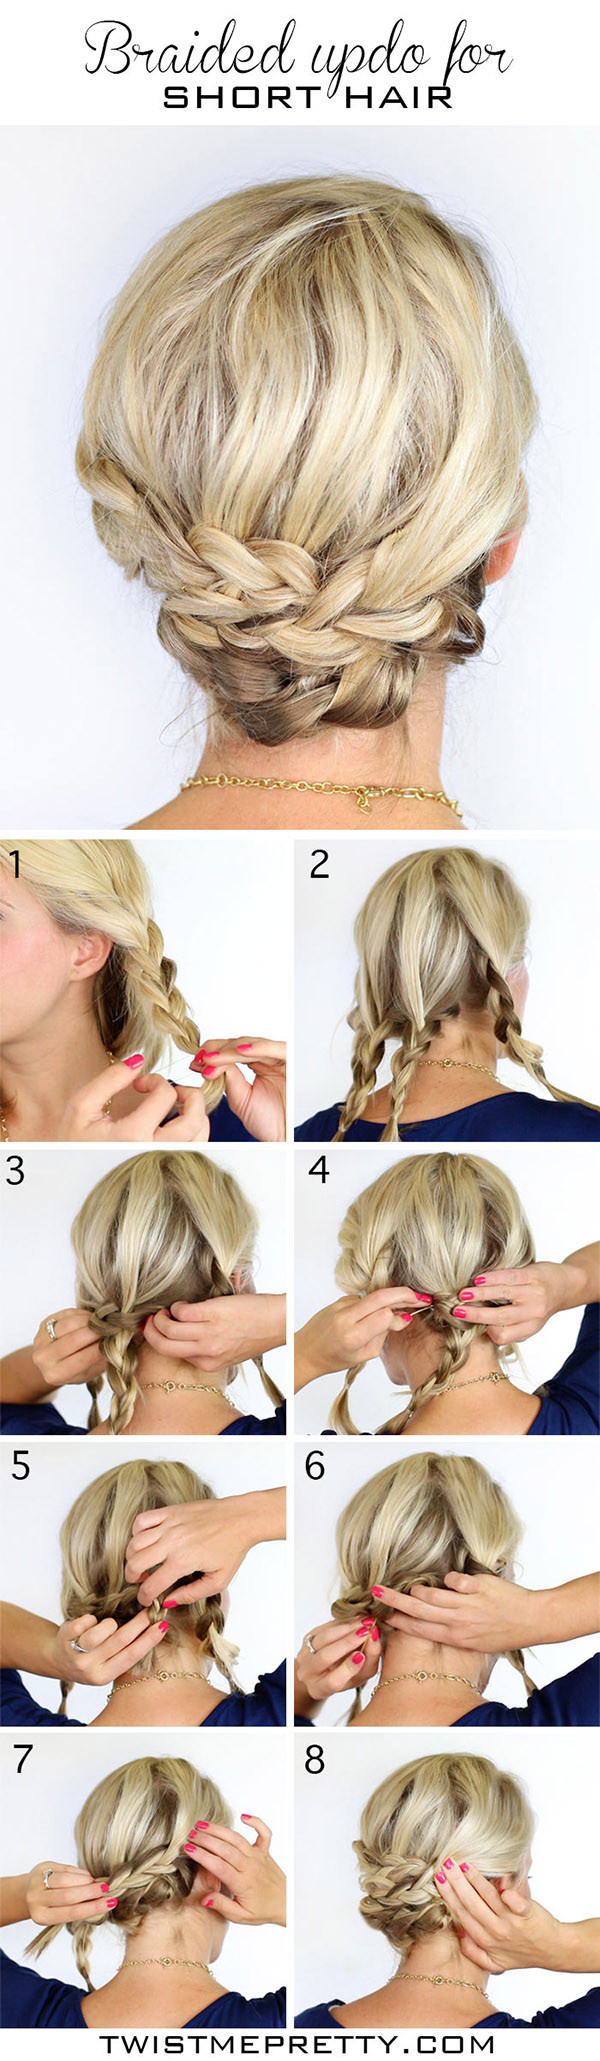 DIY Wedding Hairstyles
 20 DIY Wedding Hairstyles With Tutorials To Try Your Own